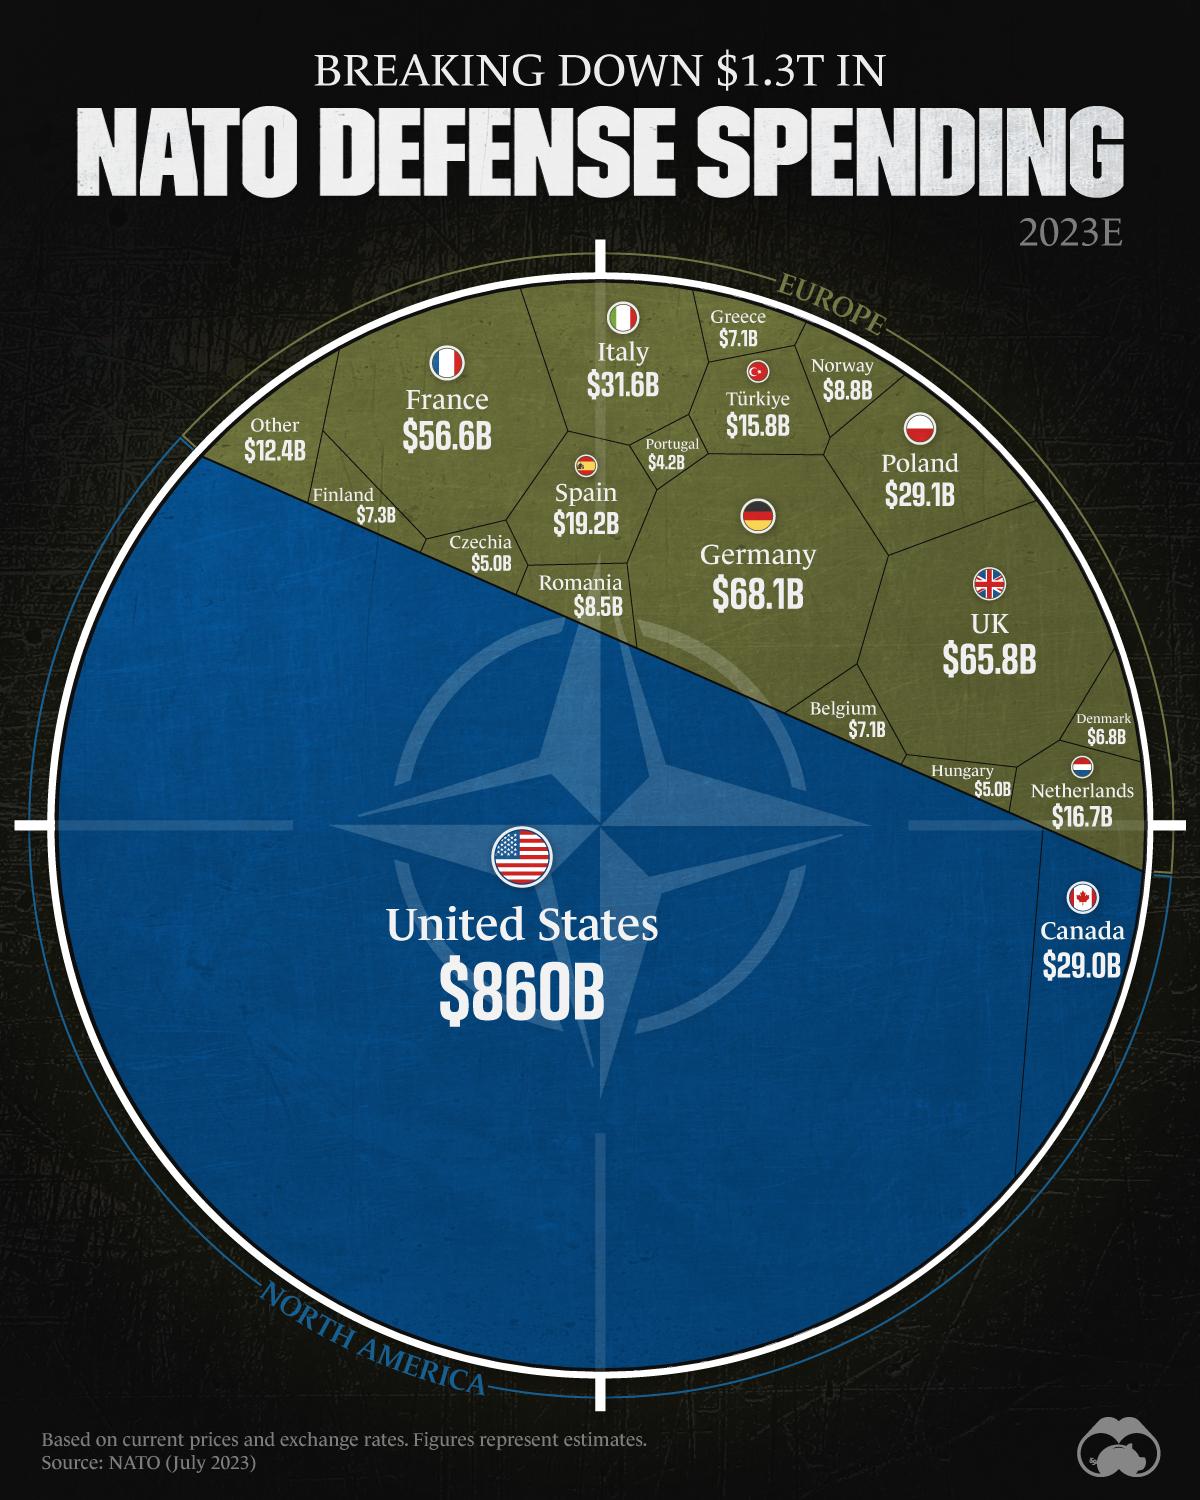 The U.S. Spends More Than Double on Defense Than the Rest of NATO Combined